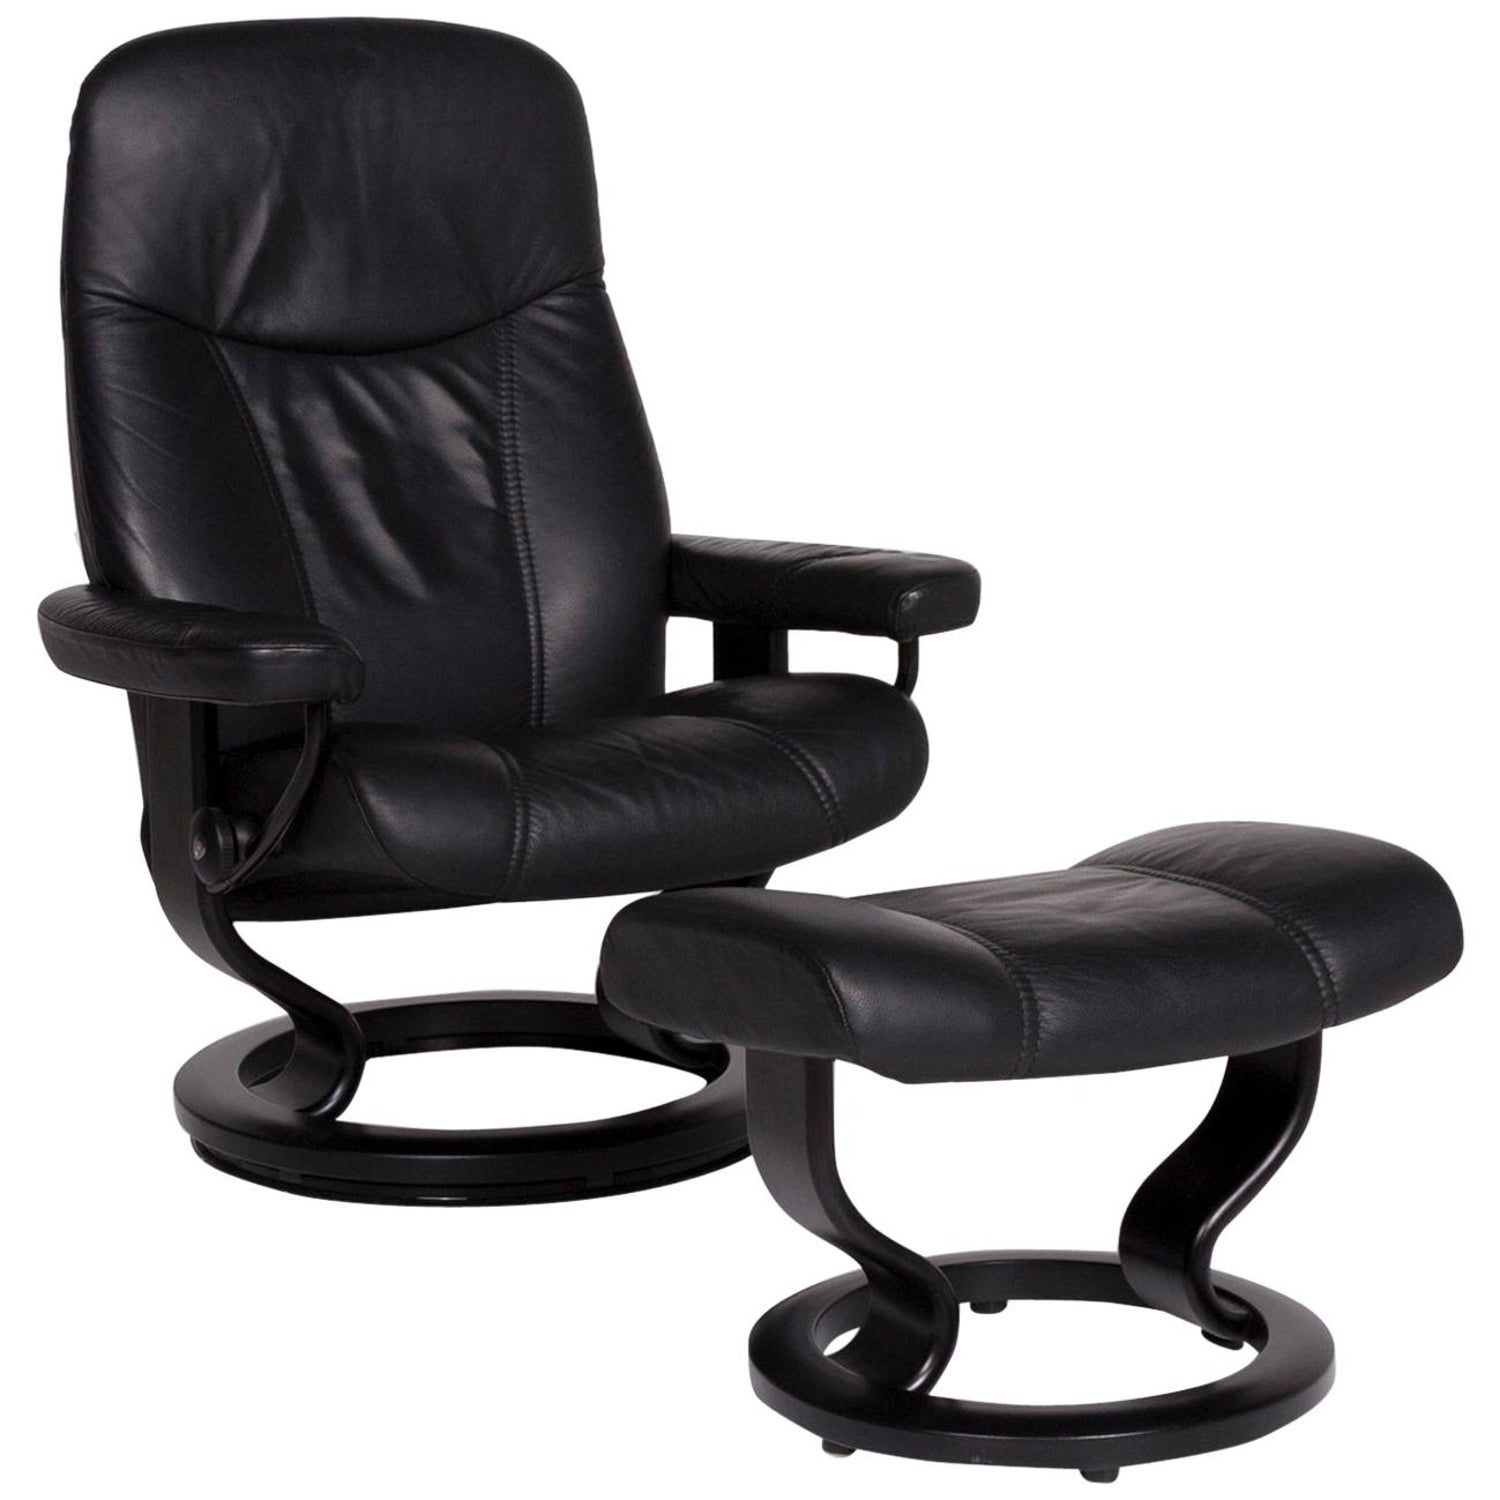 Stressless Consul - For Sale on 1stDibs